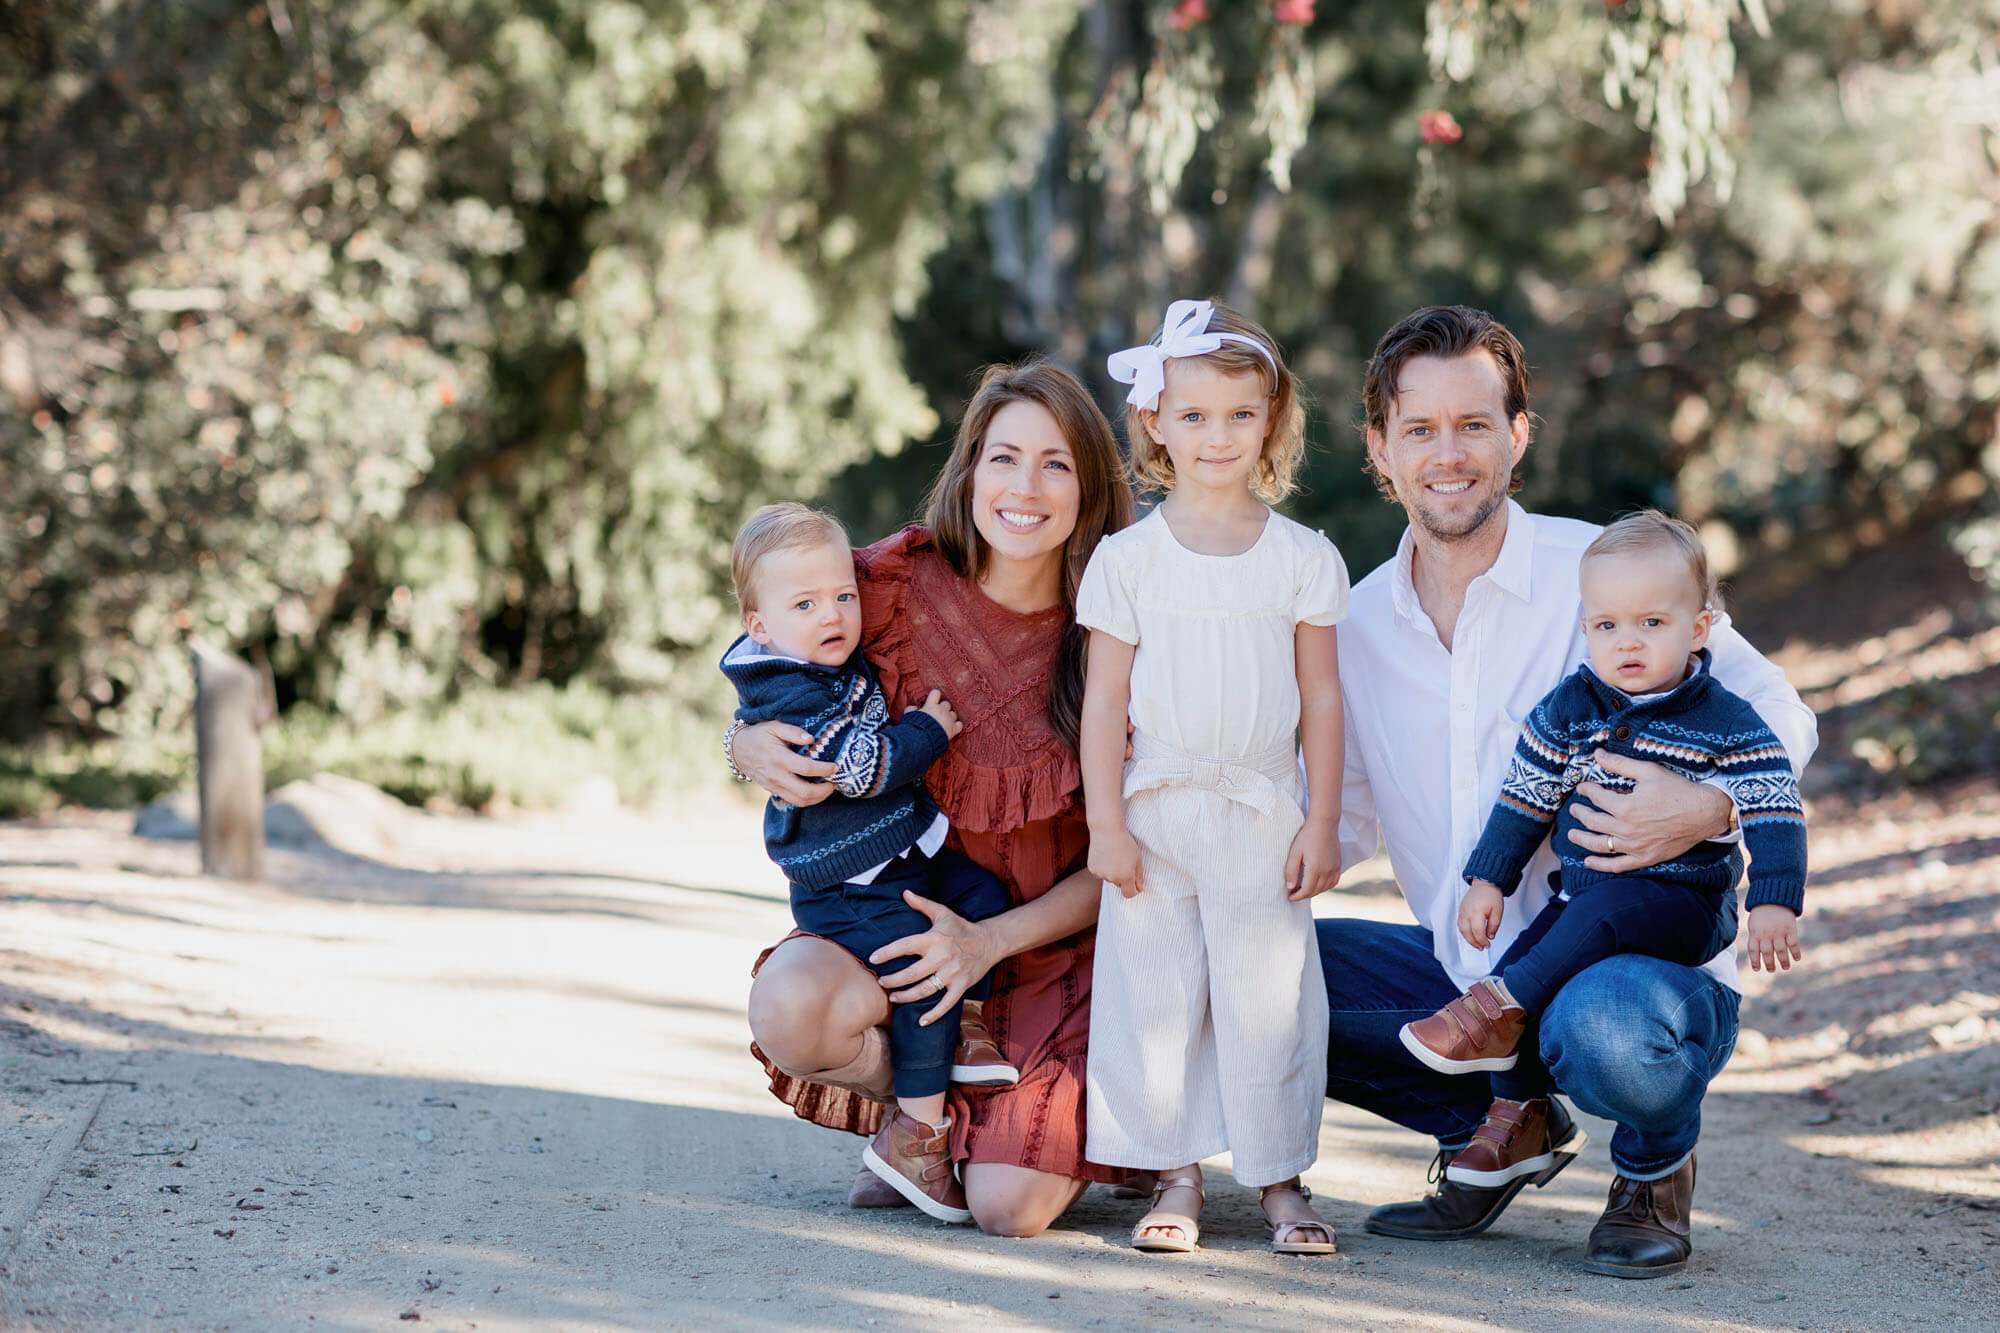 Leo Carrillo Ranch in Carlsbad offers a unique location for your family pictures and is on the list of the Best Locations for San Diego Family Photos